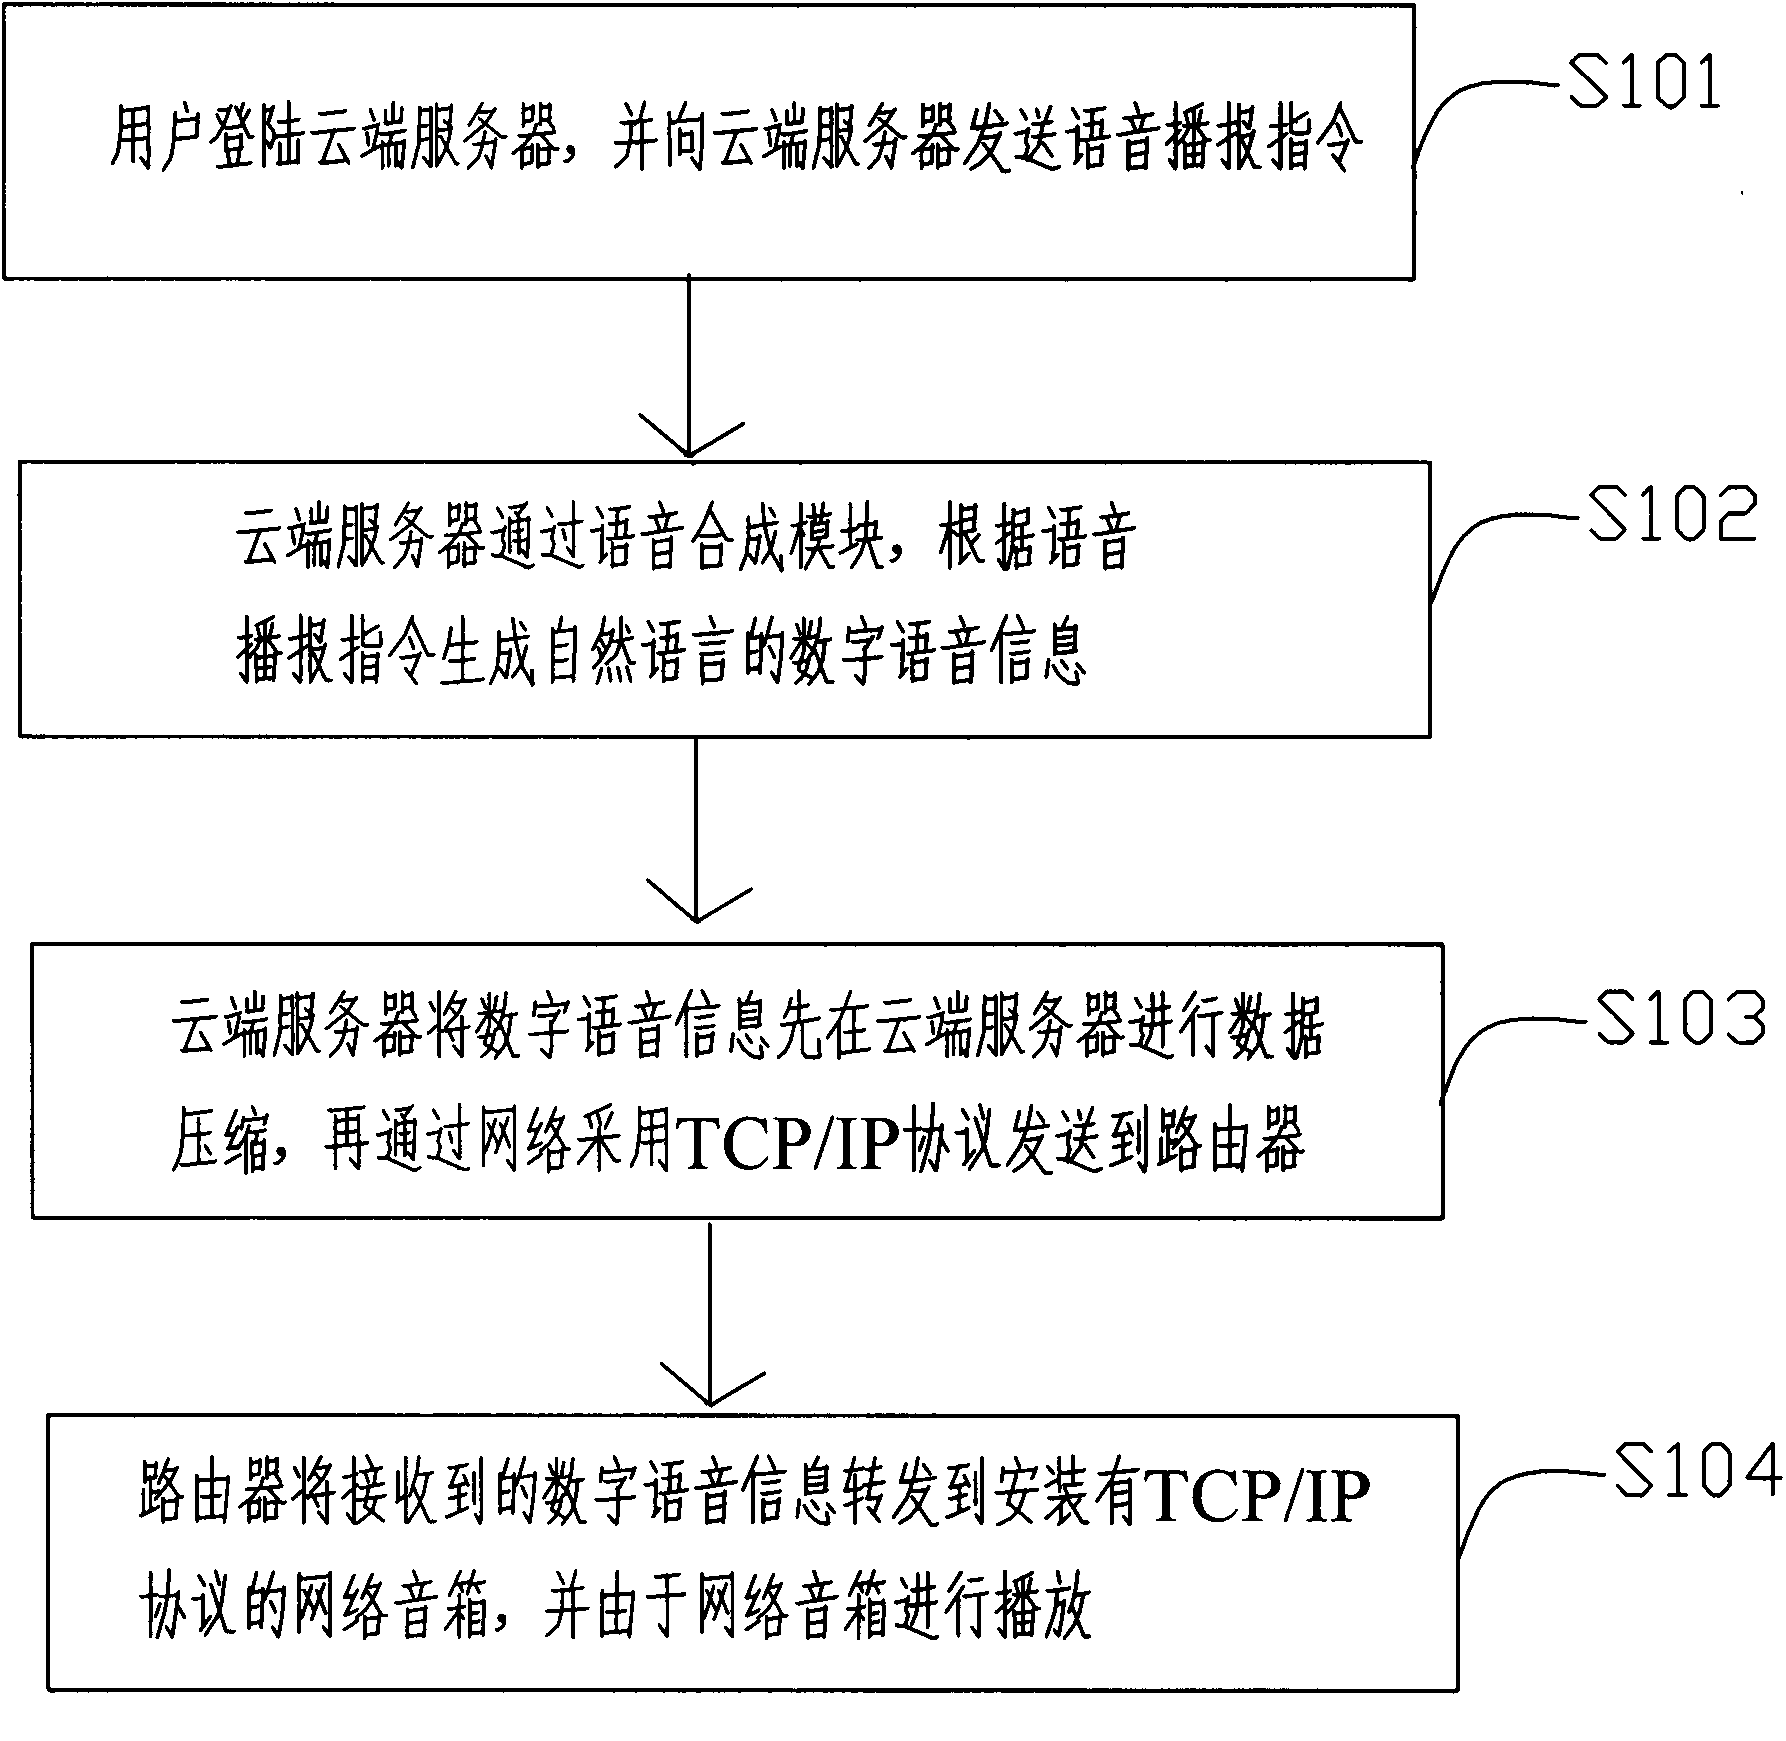 Enterprise production safety management voice broadcast system and method thereof